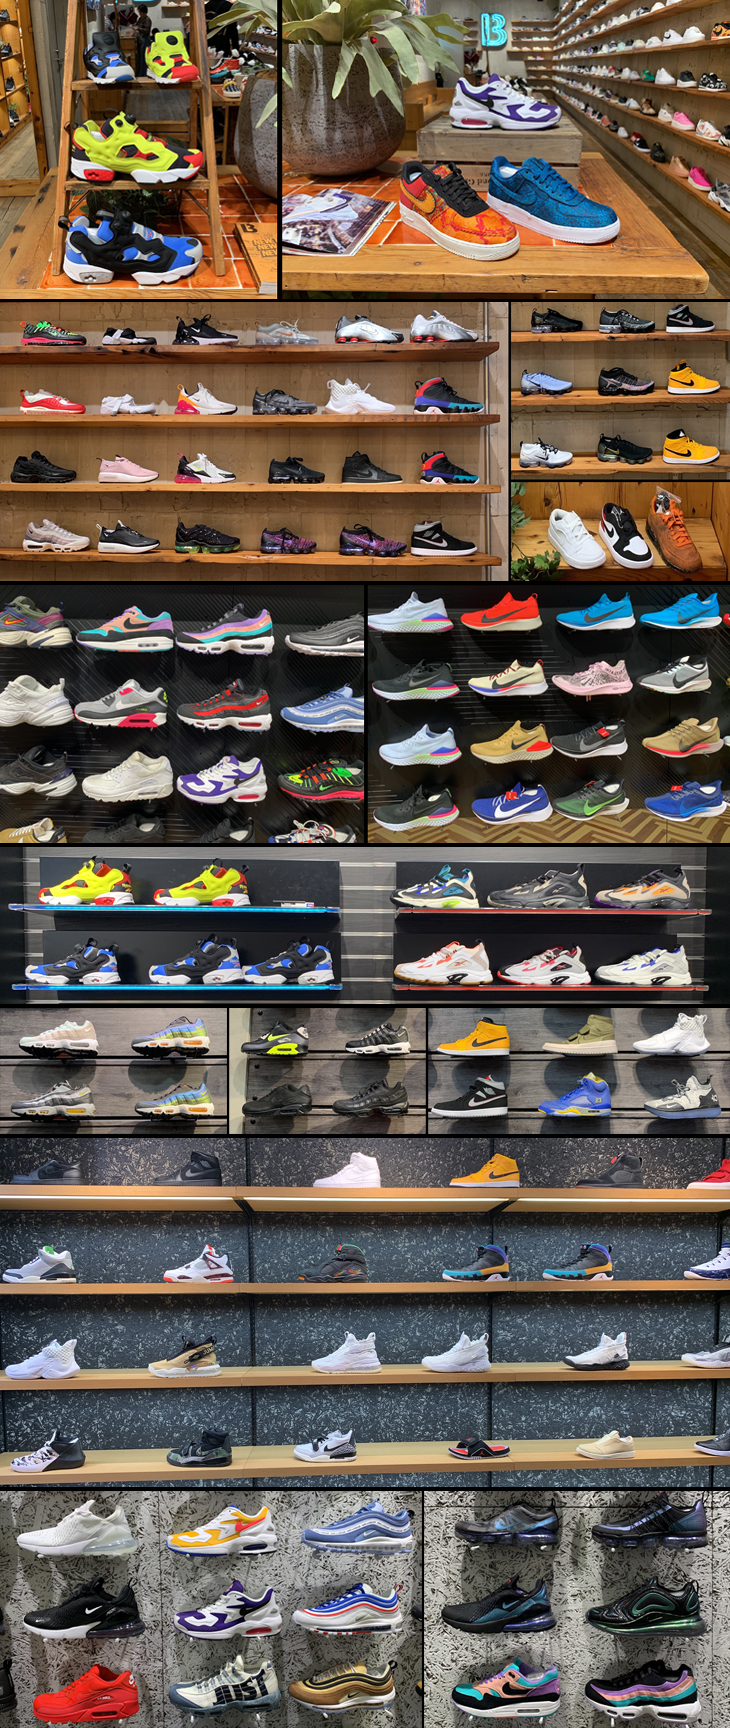 Sneakers on sale at the store